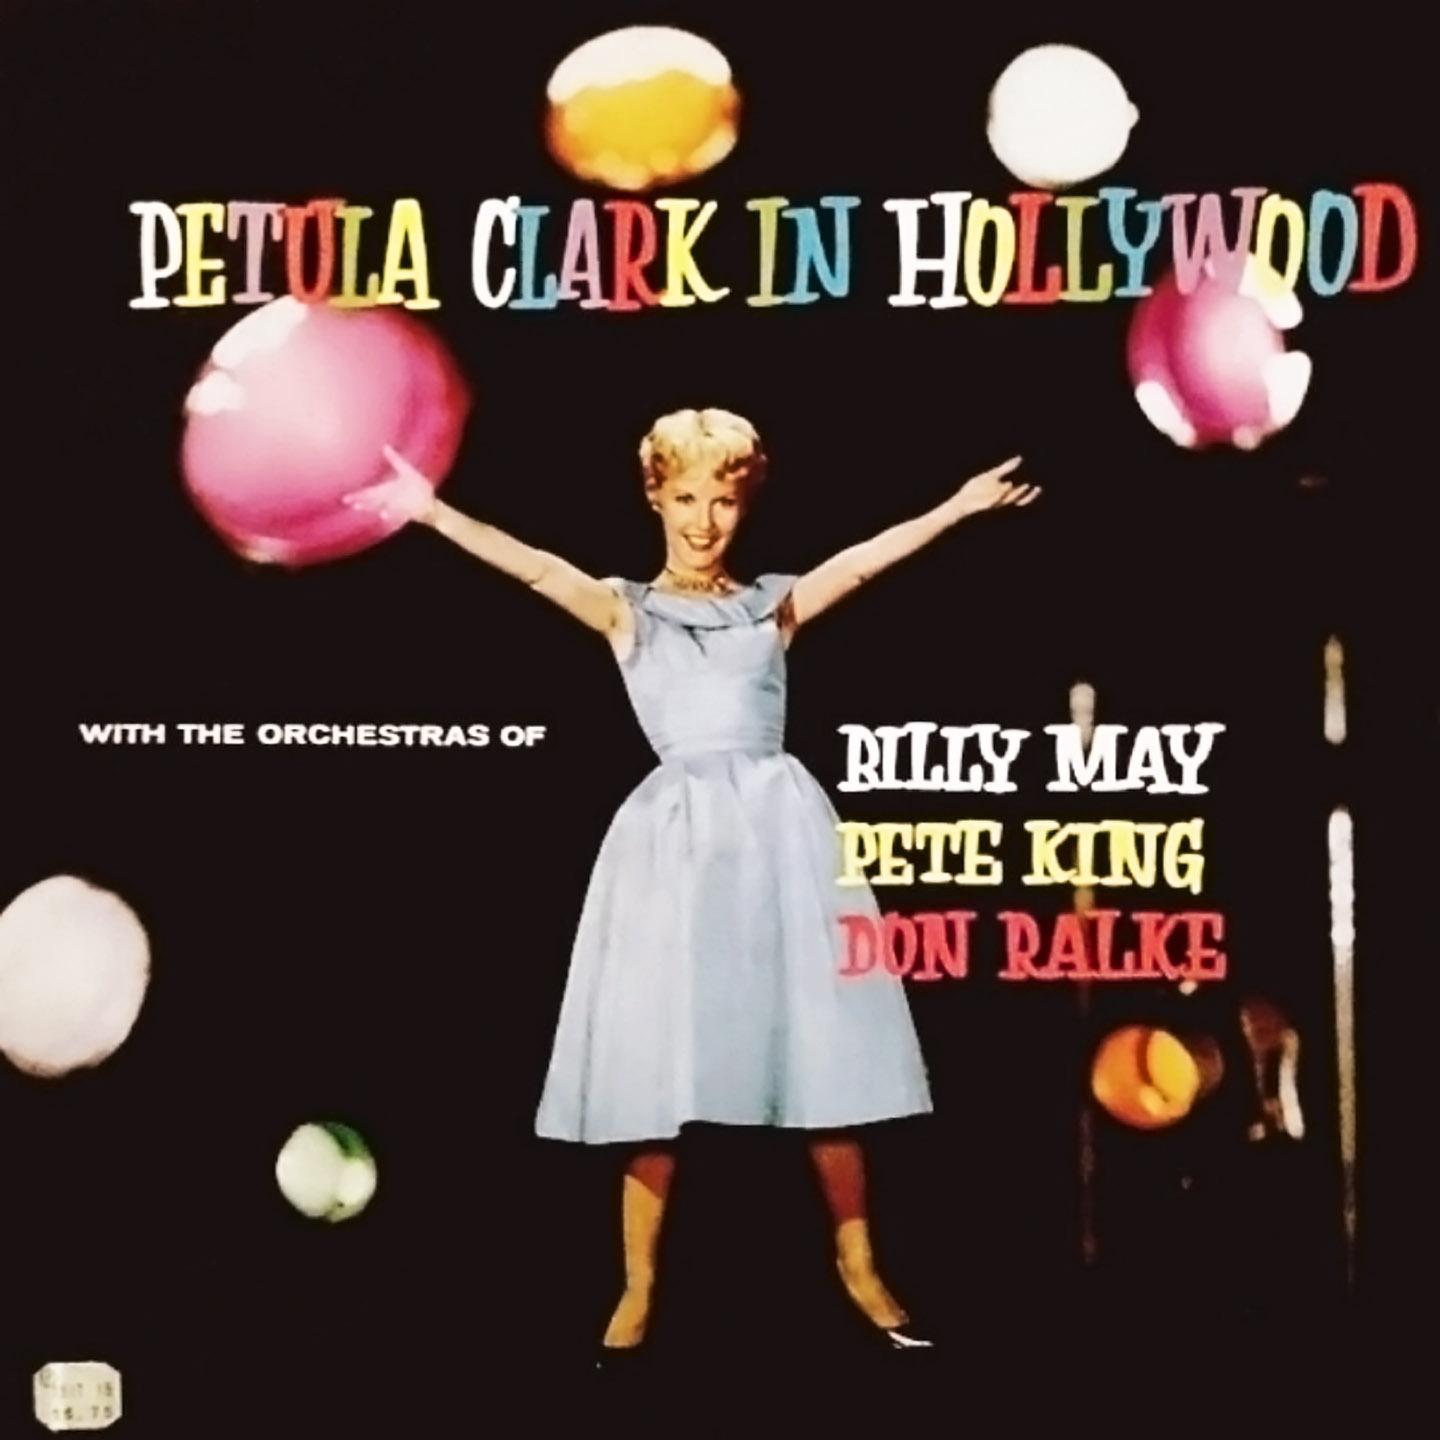 In Hollywood (With Orchestras of Billy May/Pete King/Don Ralke)